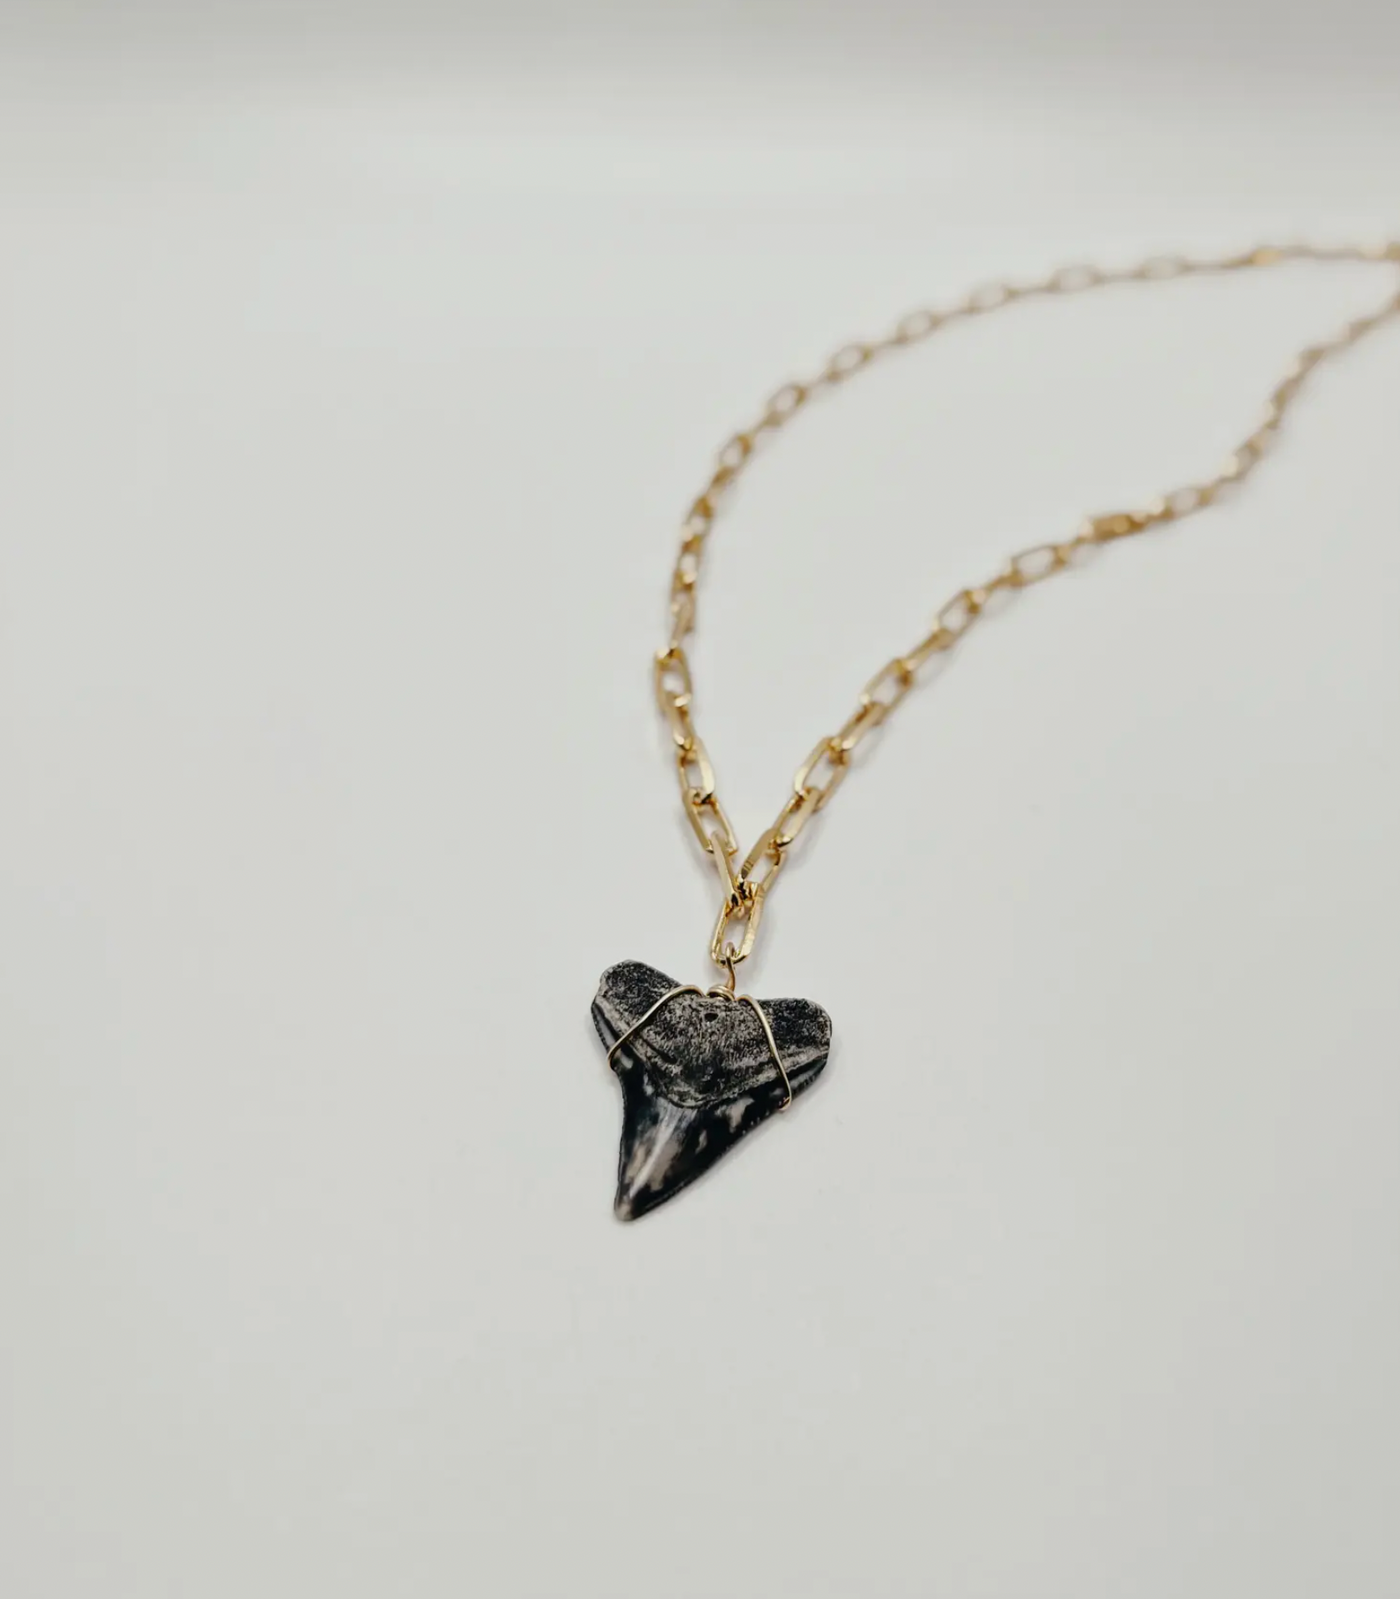 18k Gold Filled Paperclip Chain Shark Tooth Necklace